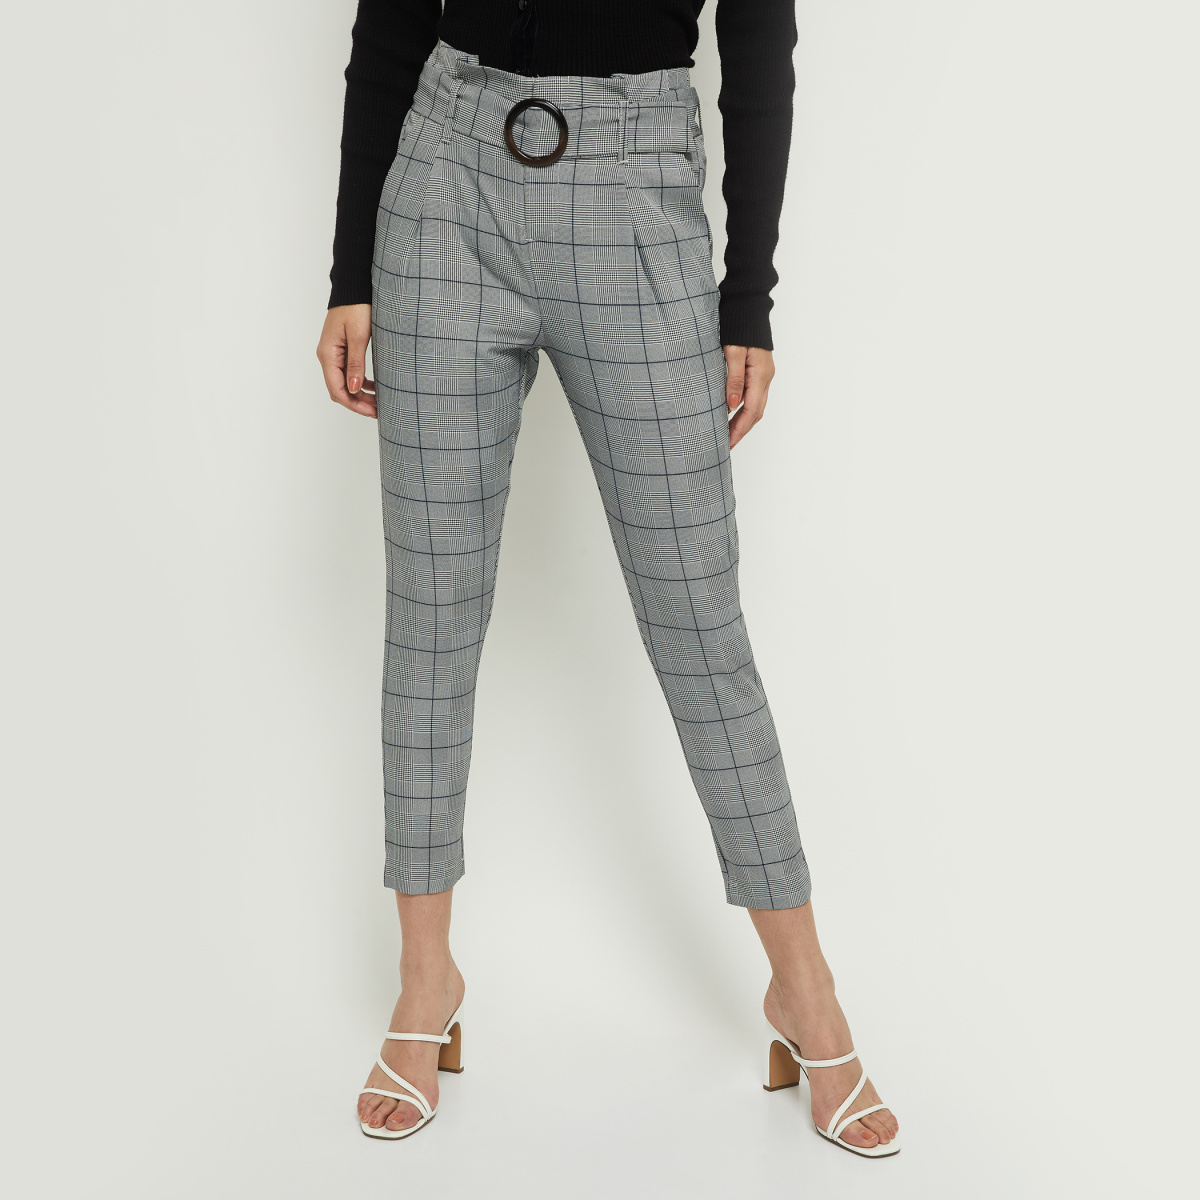 Check Pants For Women | Checked Pants Online | Ally Fashion